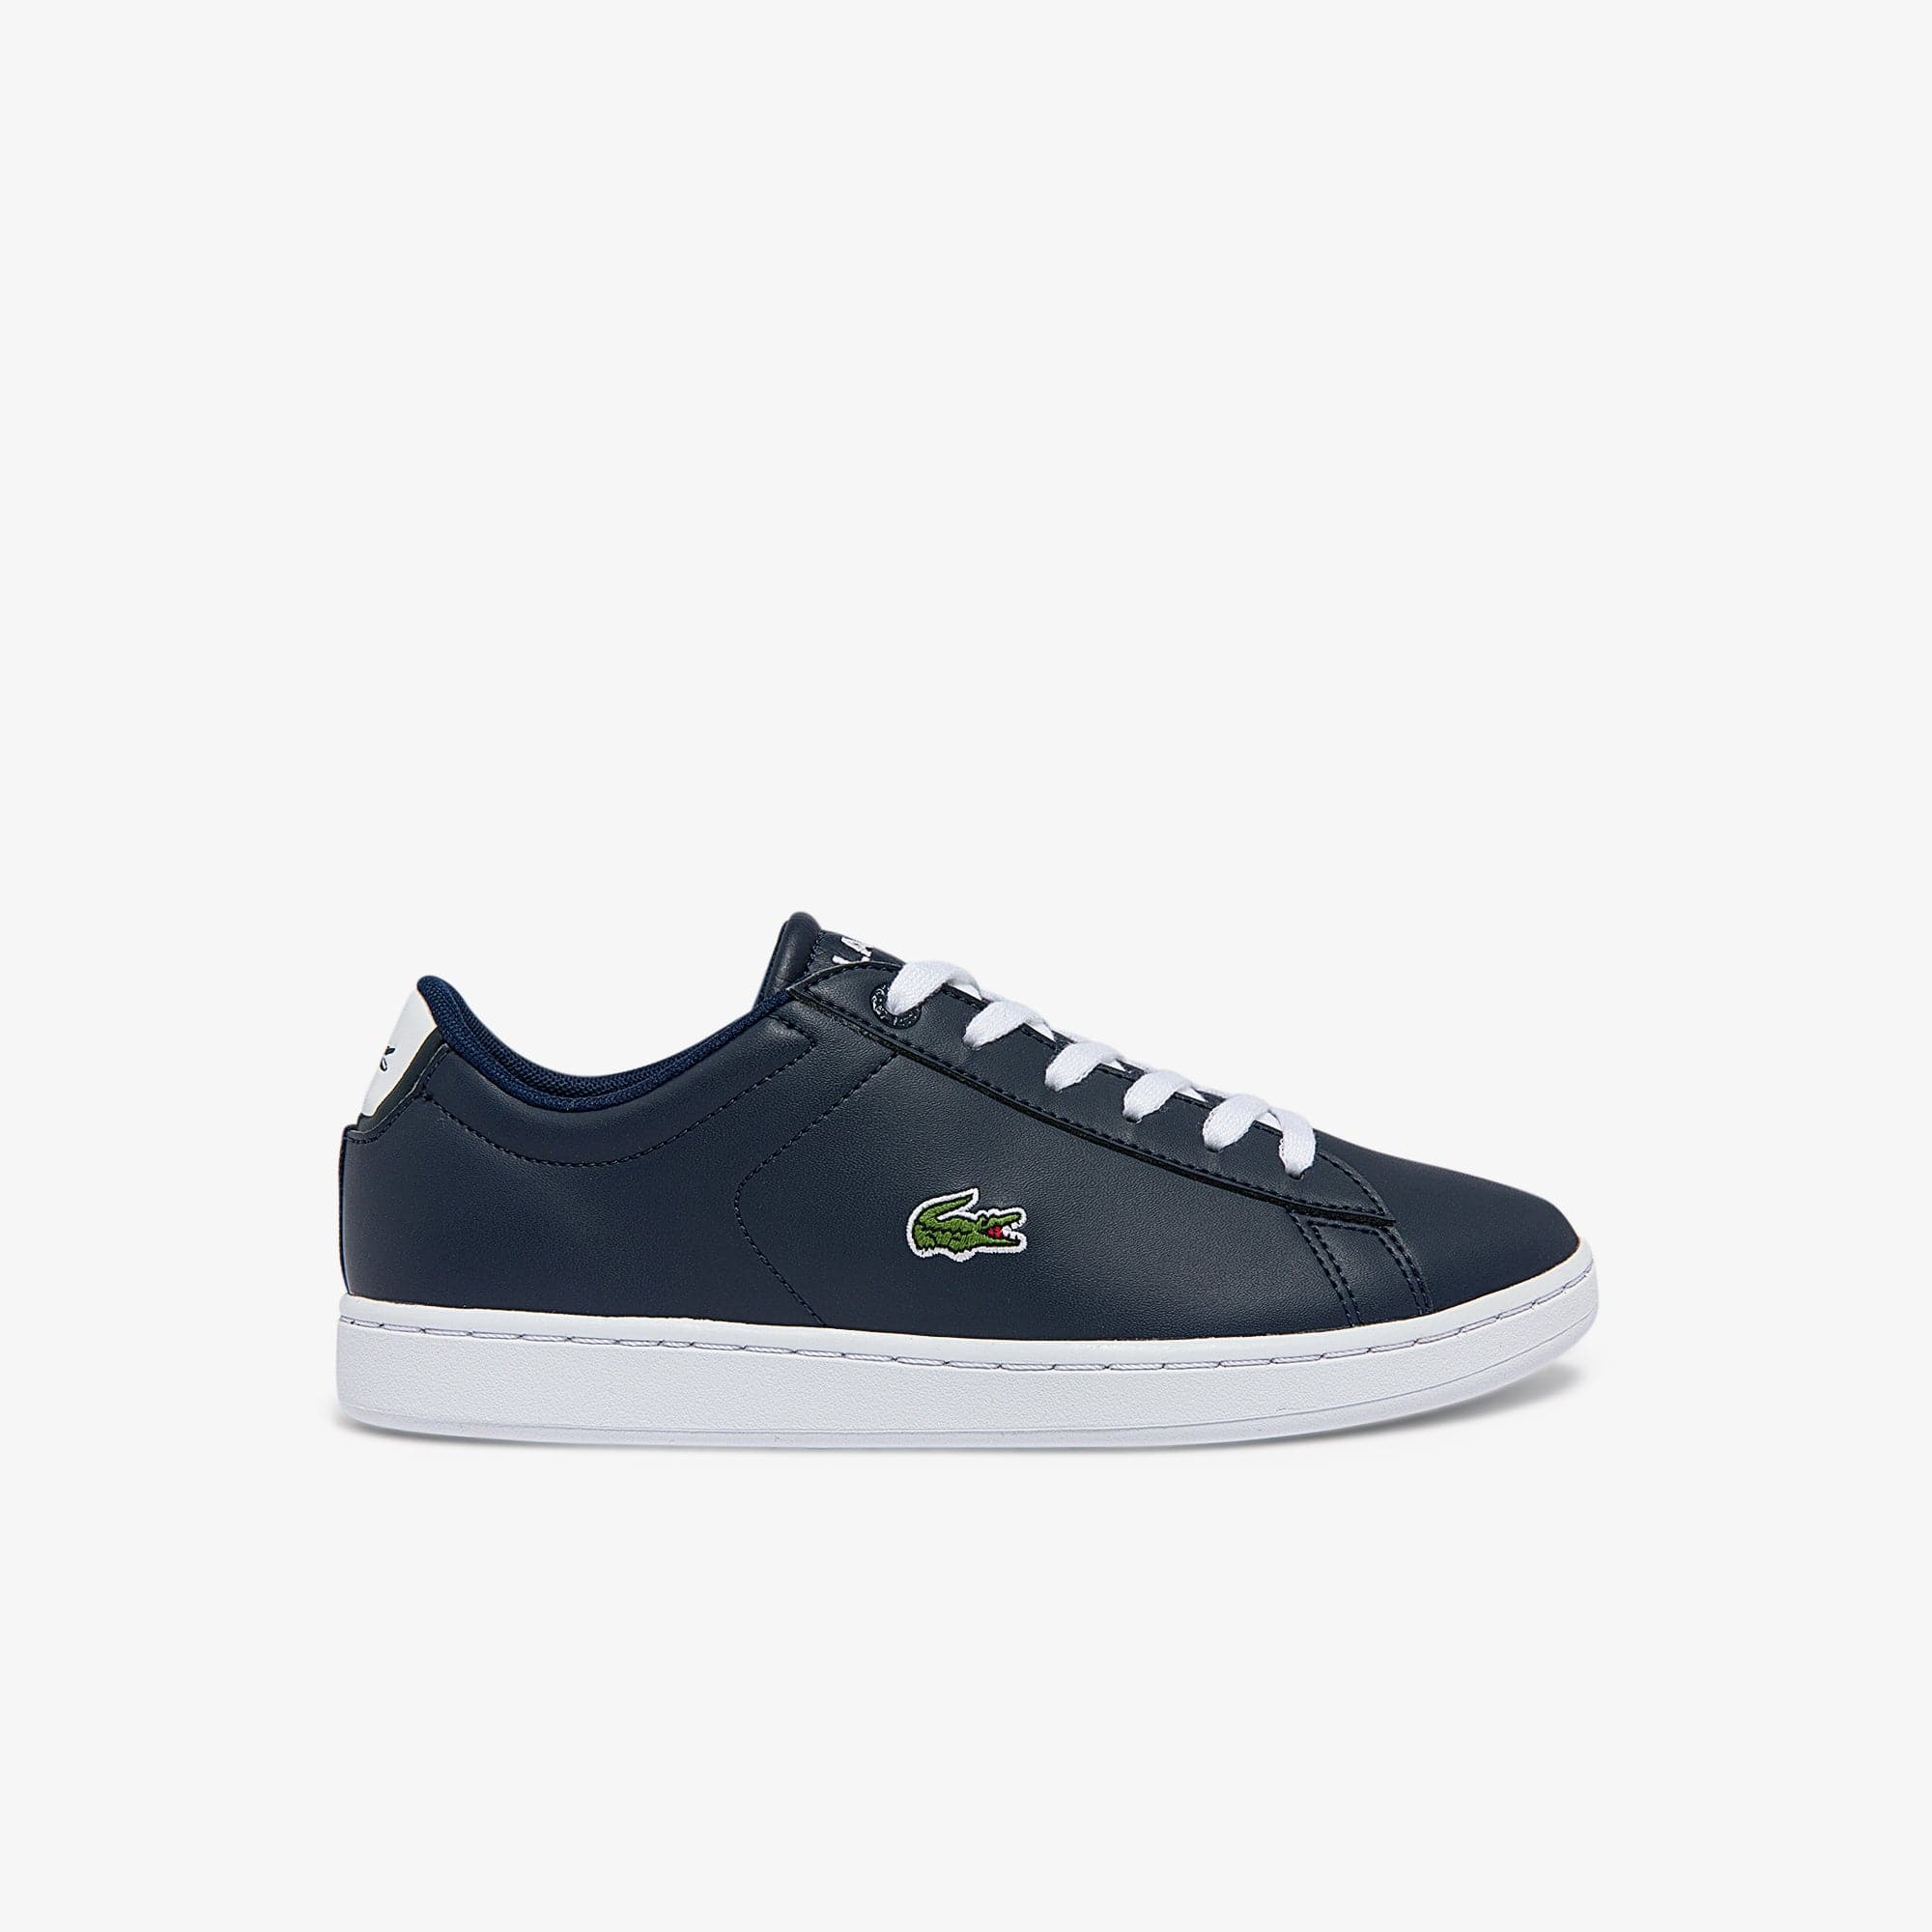 Lacoste Shoes Boys Lacoste Carnaby Navy Sneakers